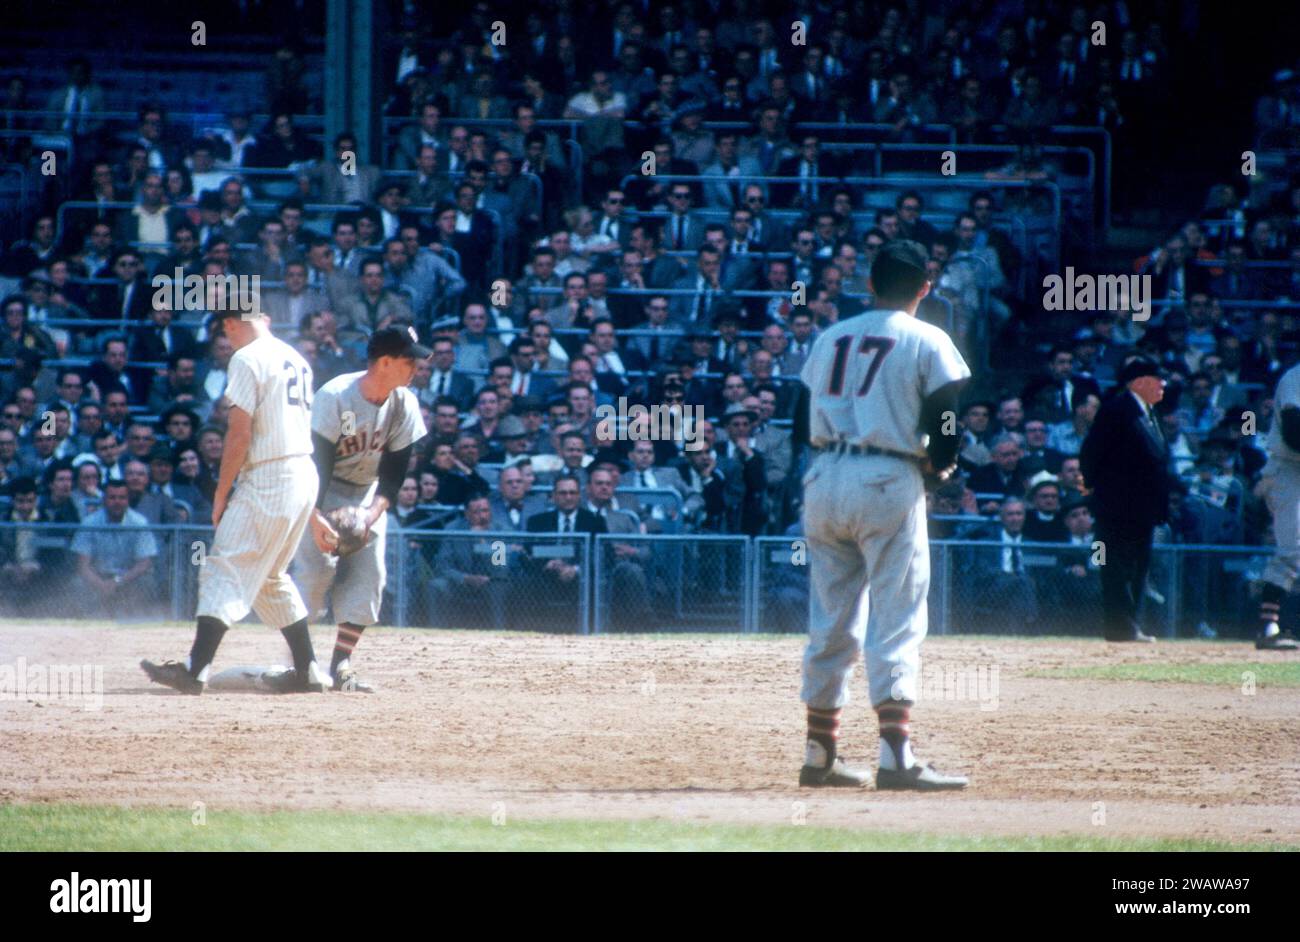 BRONX, NY - 1955:  Billy Hunter #20 of the New York Yankees stands on second base as Nellie Fox #2 of the Chicago White Sox holds the ball during an MLB game circa 1955 at Yankee Stadium in the Bronx, New York.  The White Sox shortstop is Chico Carrasquel #17.  (Photo by Hy Peskin) *** Local Caption *** Nellie Fox;Billy Hunter;Chico Carrasquel Stock Photo